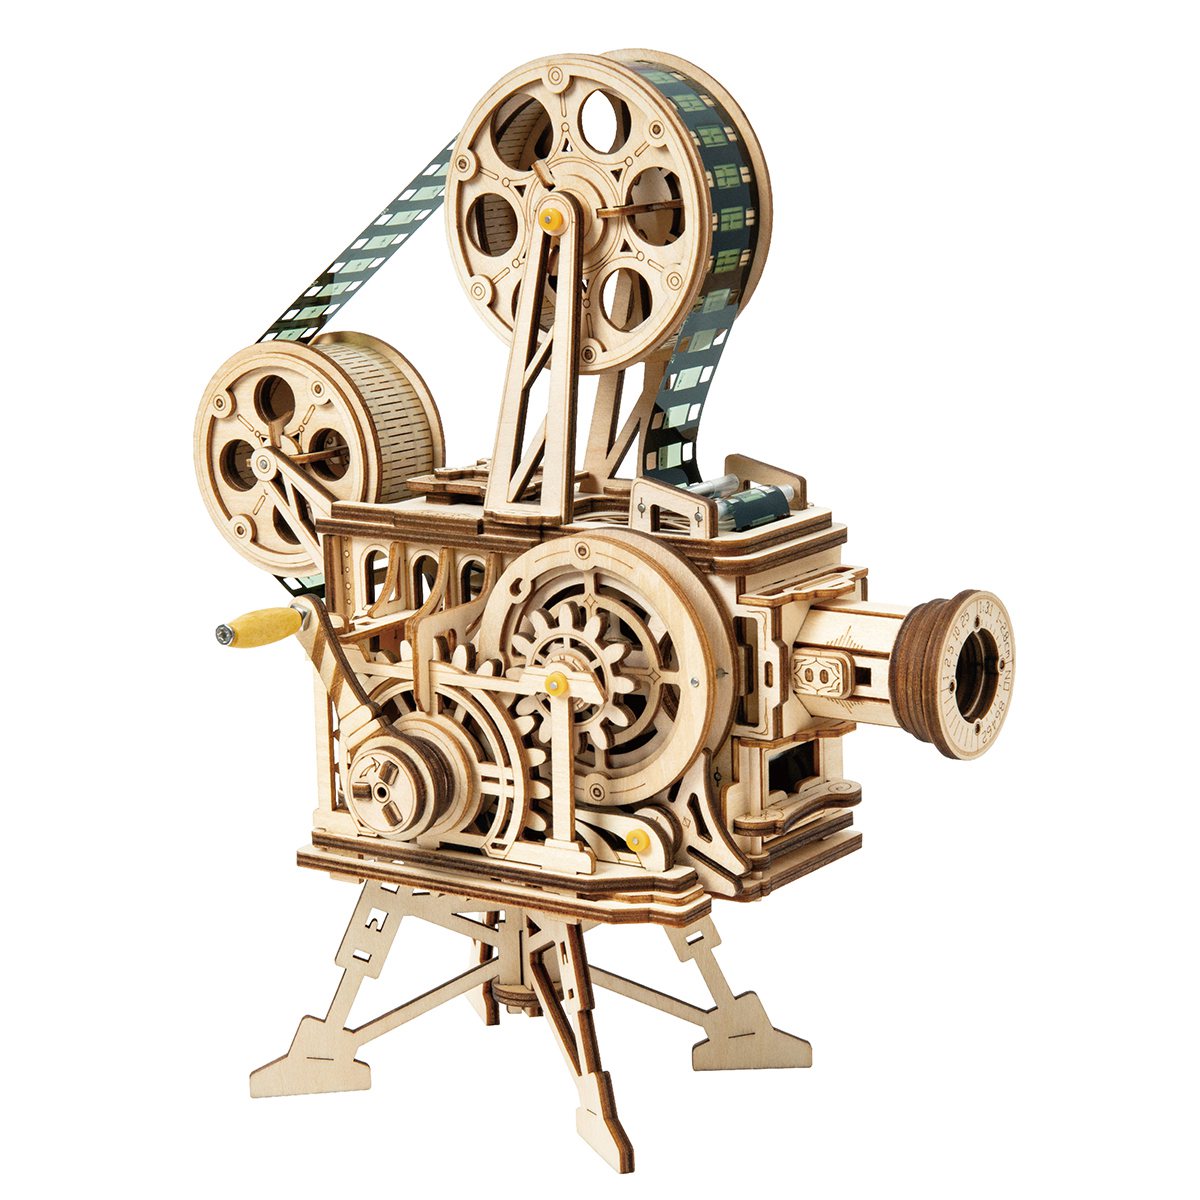 3D Model Hand Crank Wooden Movie Projector Model Building Kit Assembly - It Actually Plays Film When Assembled